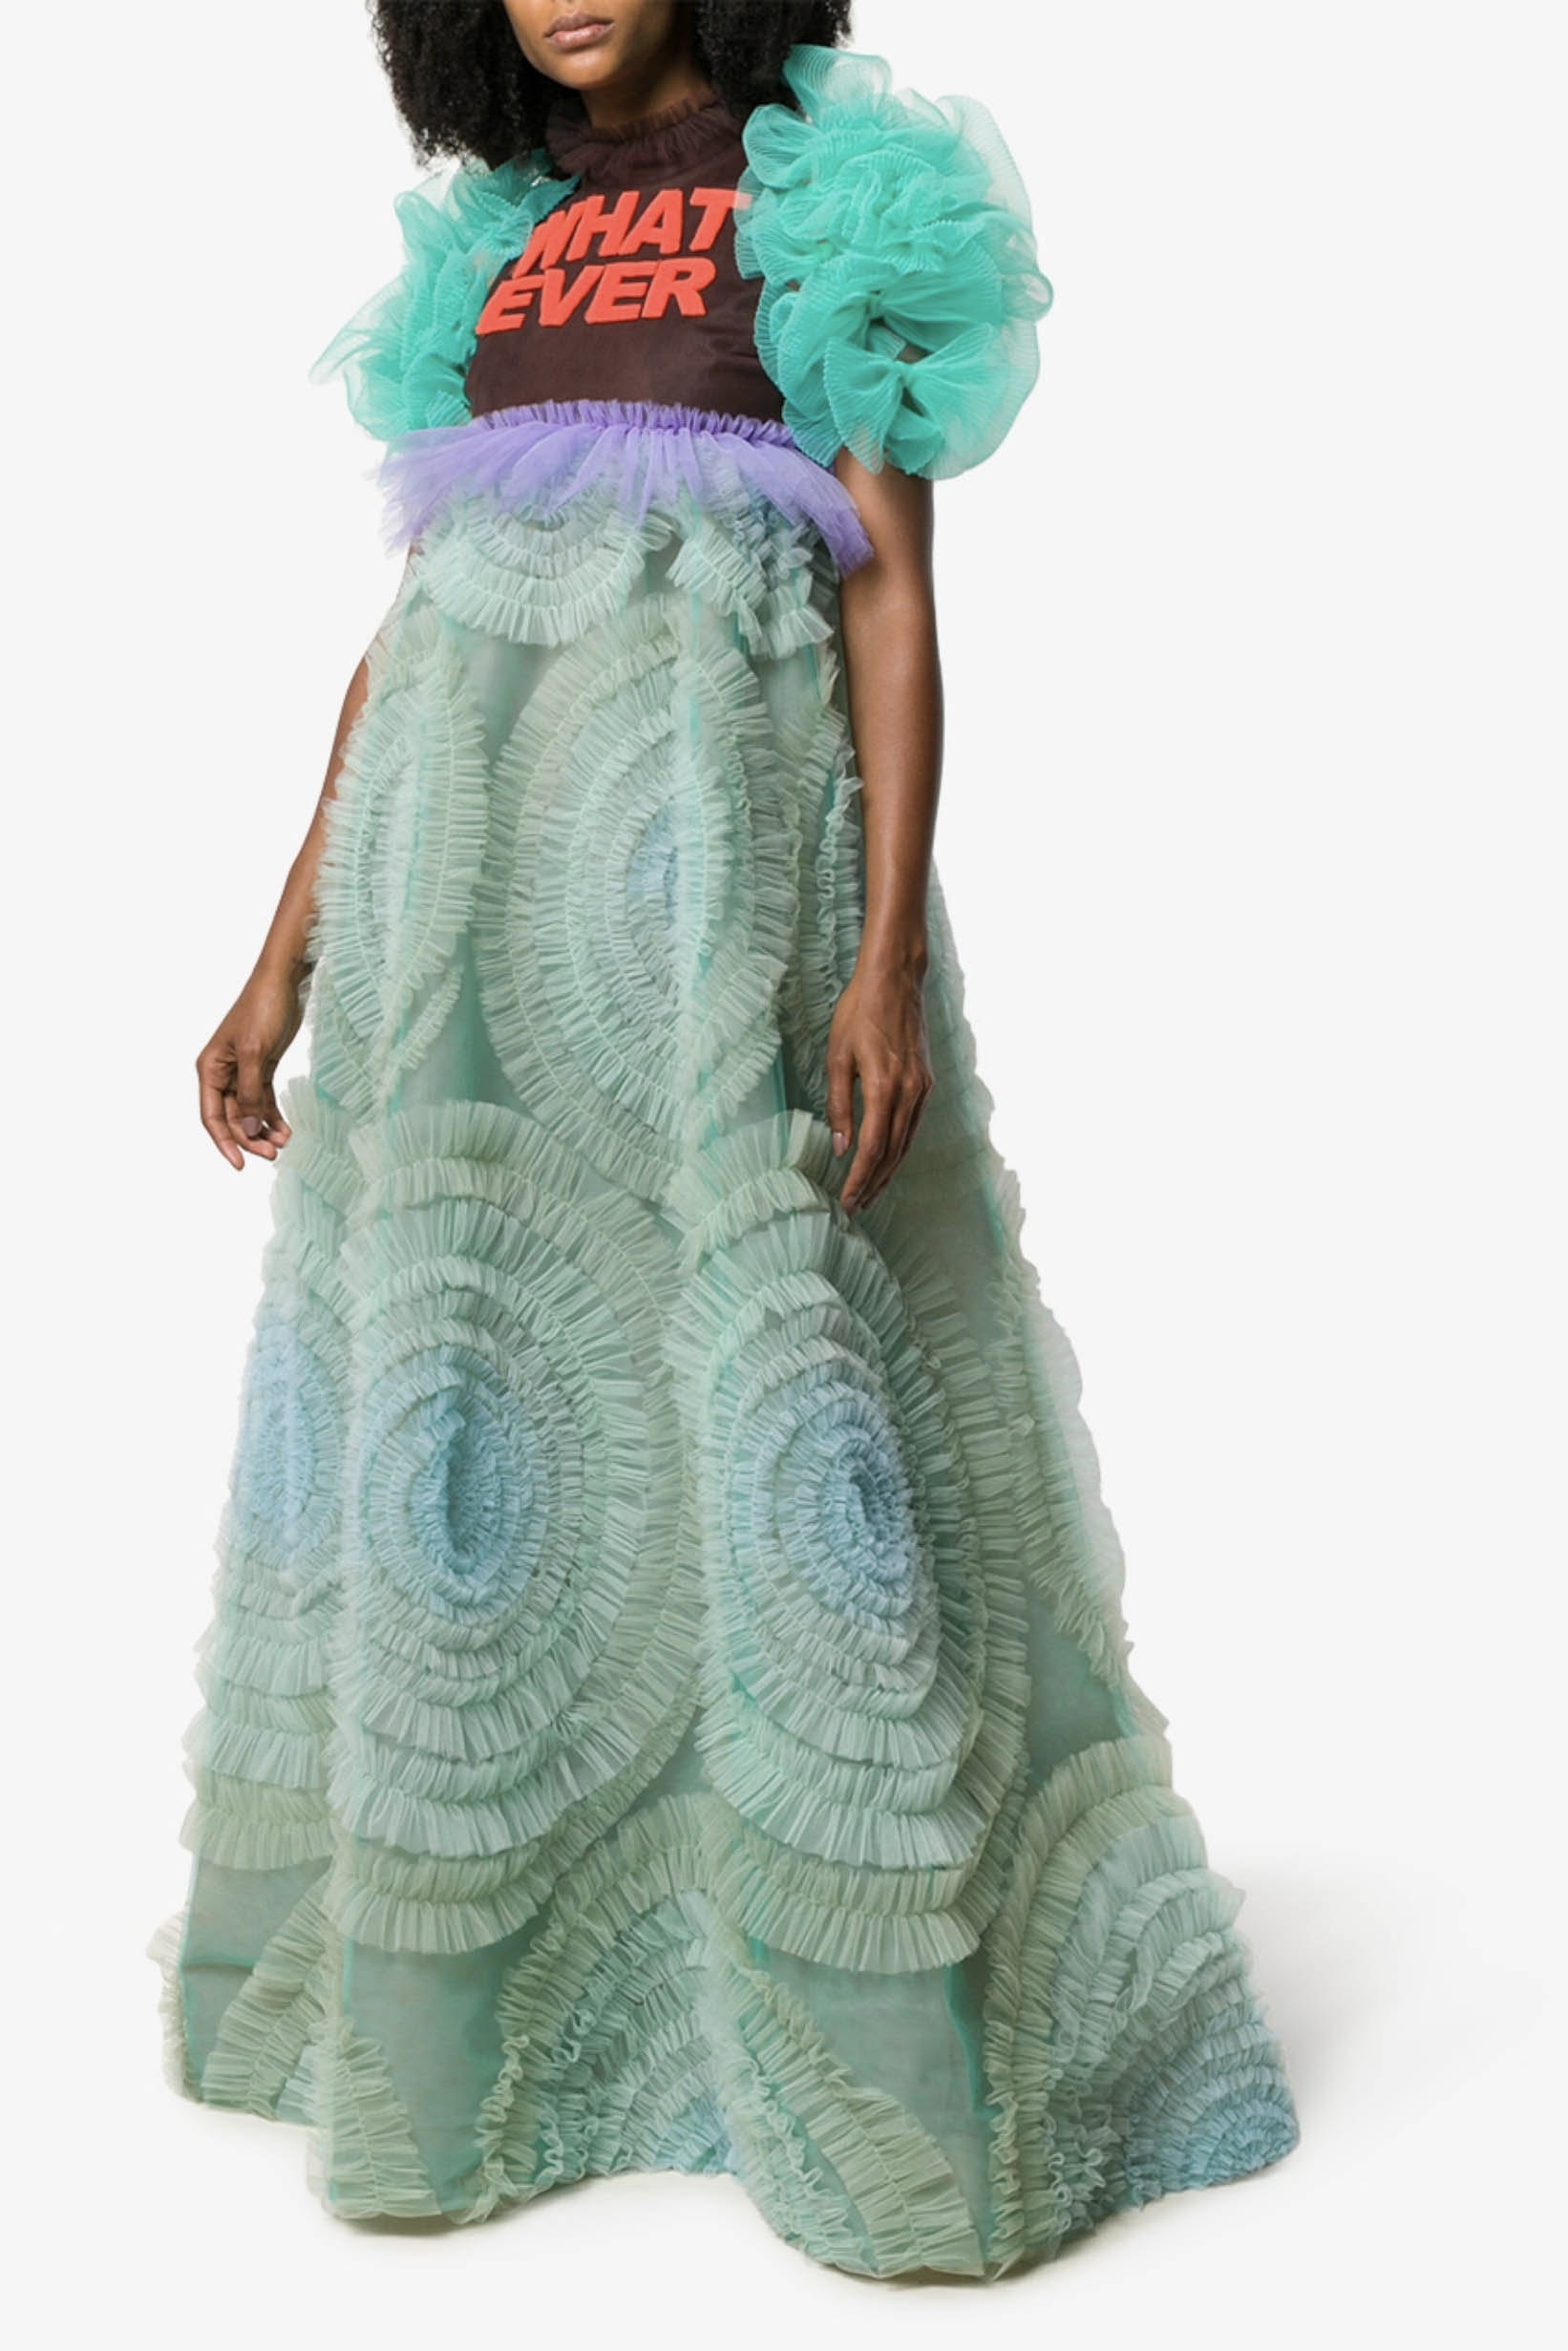 Viktor & Rolf Couture Gown Where to Buy Dress Tulle Logo Whatever $65,000 USD Price Tag Haute Couture Piece 